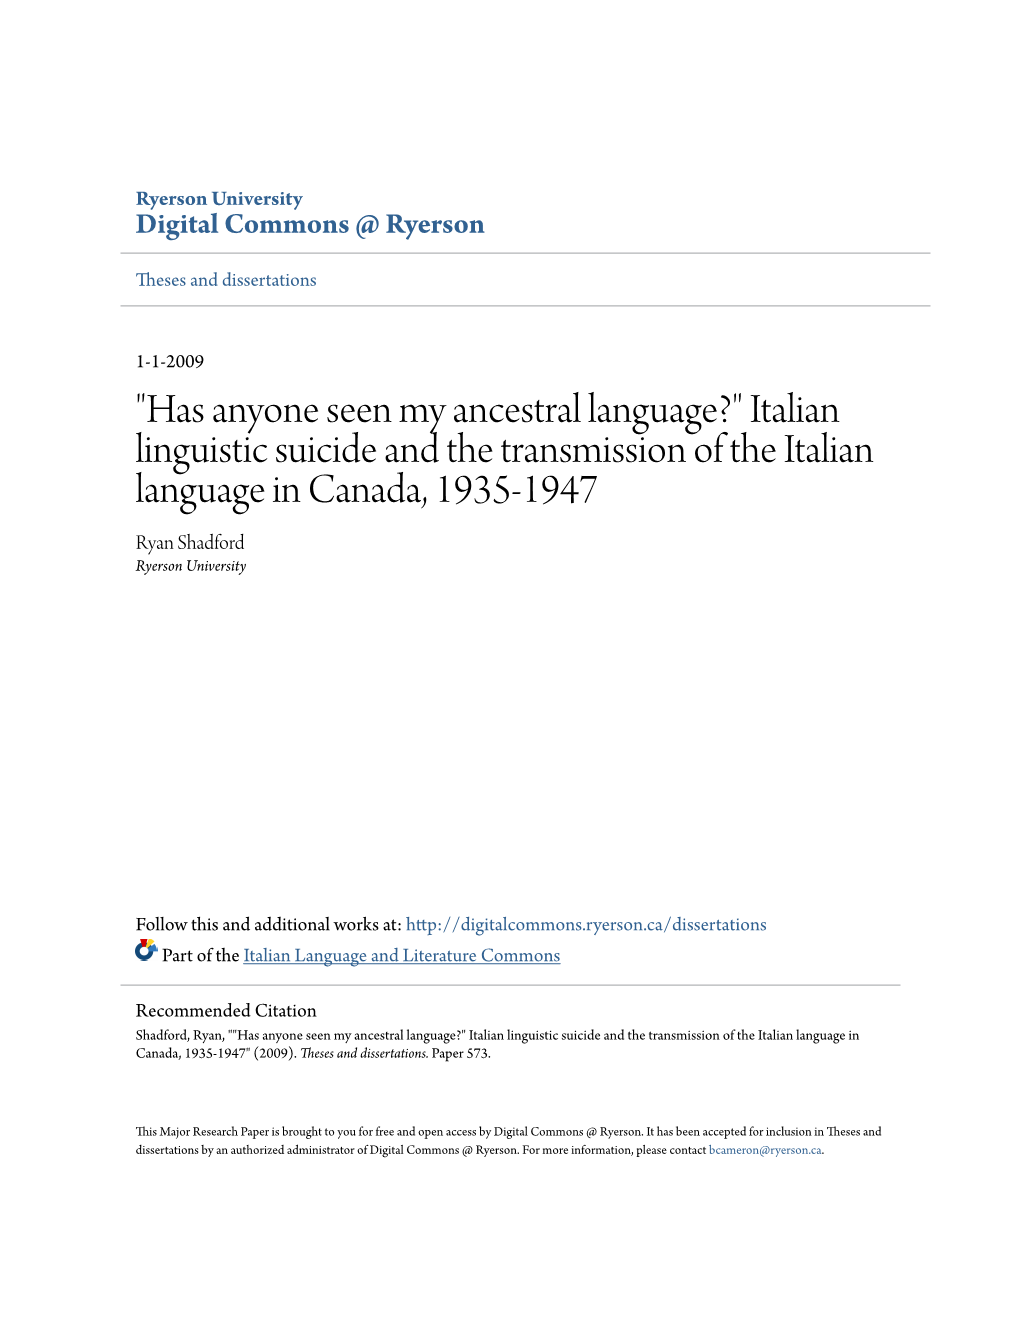 Italian Linguistic Suicide and the Transmission of the Italian Language in Canada, 1935-1947 Ryan Shadford Ryerson University